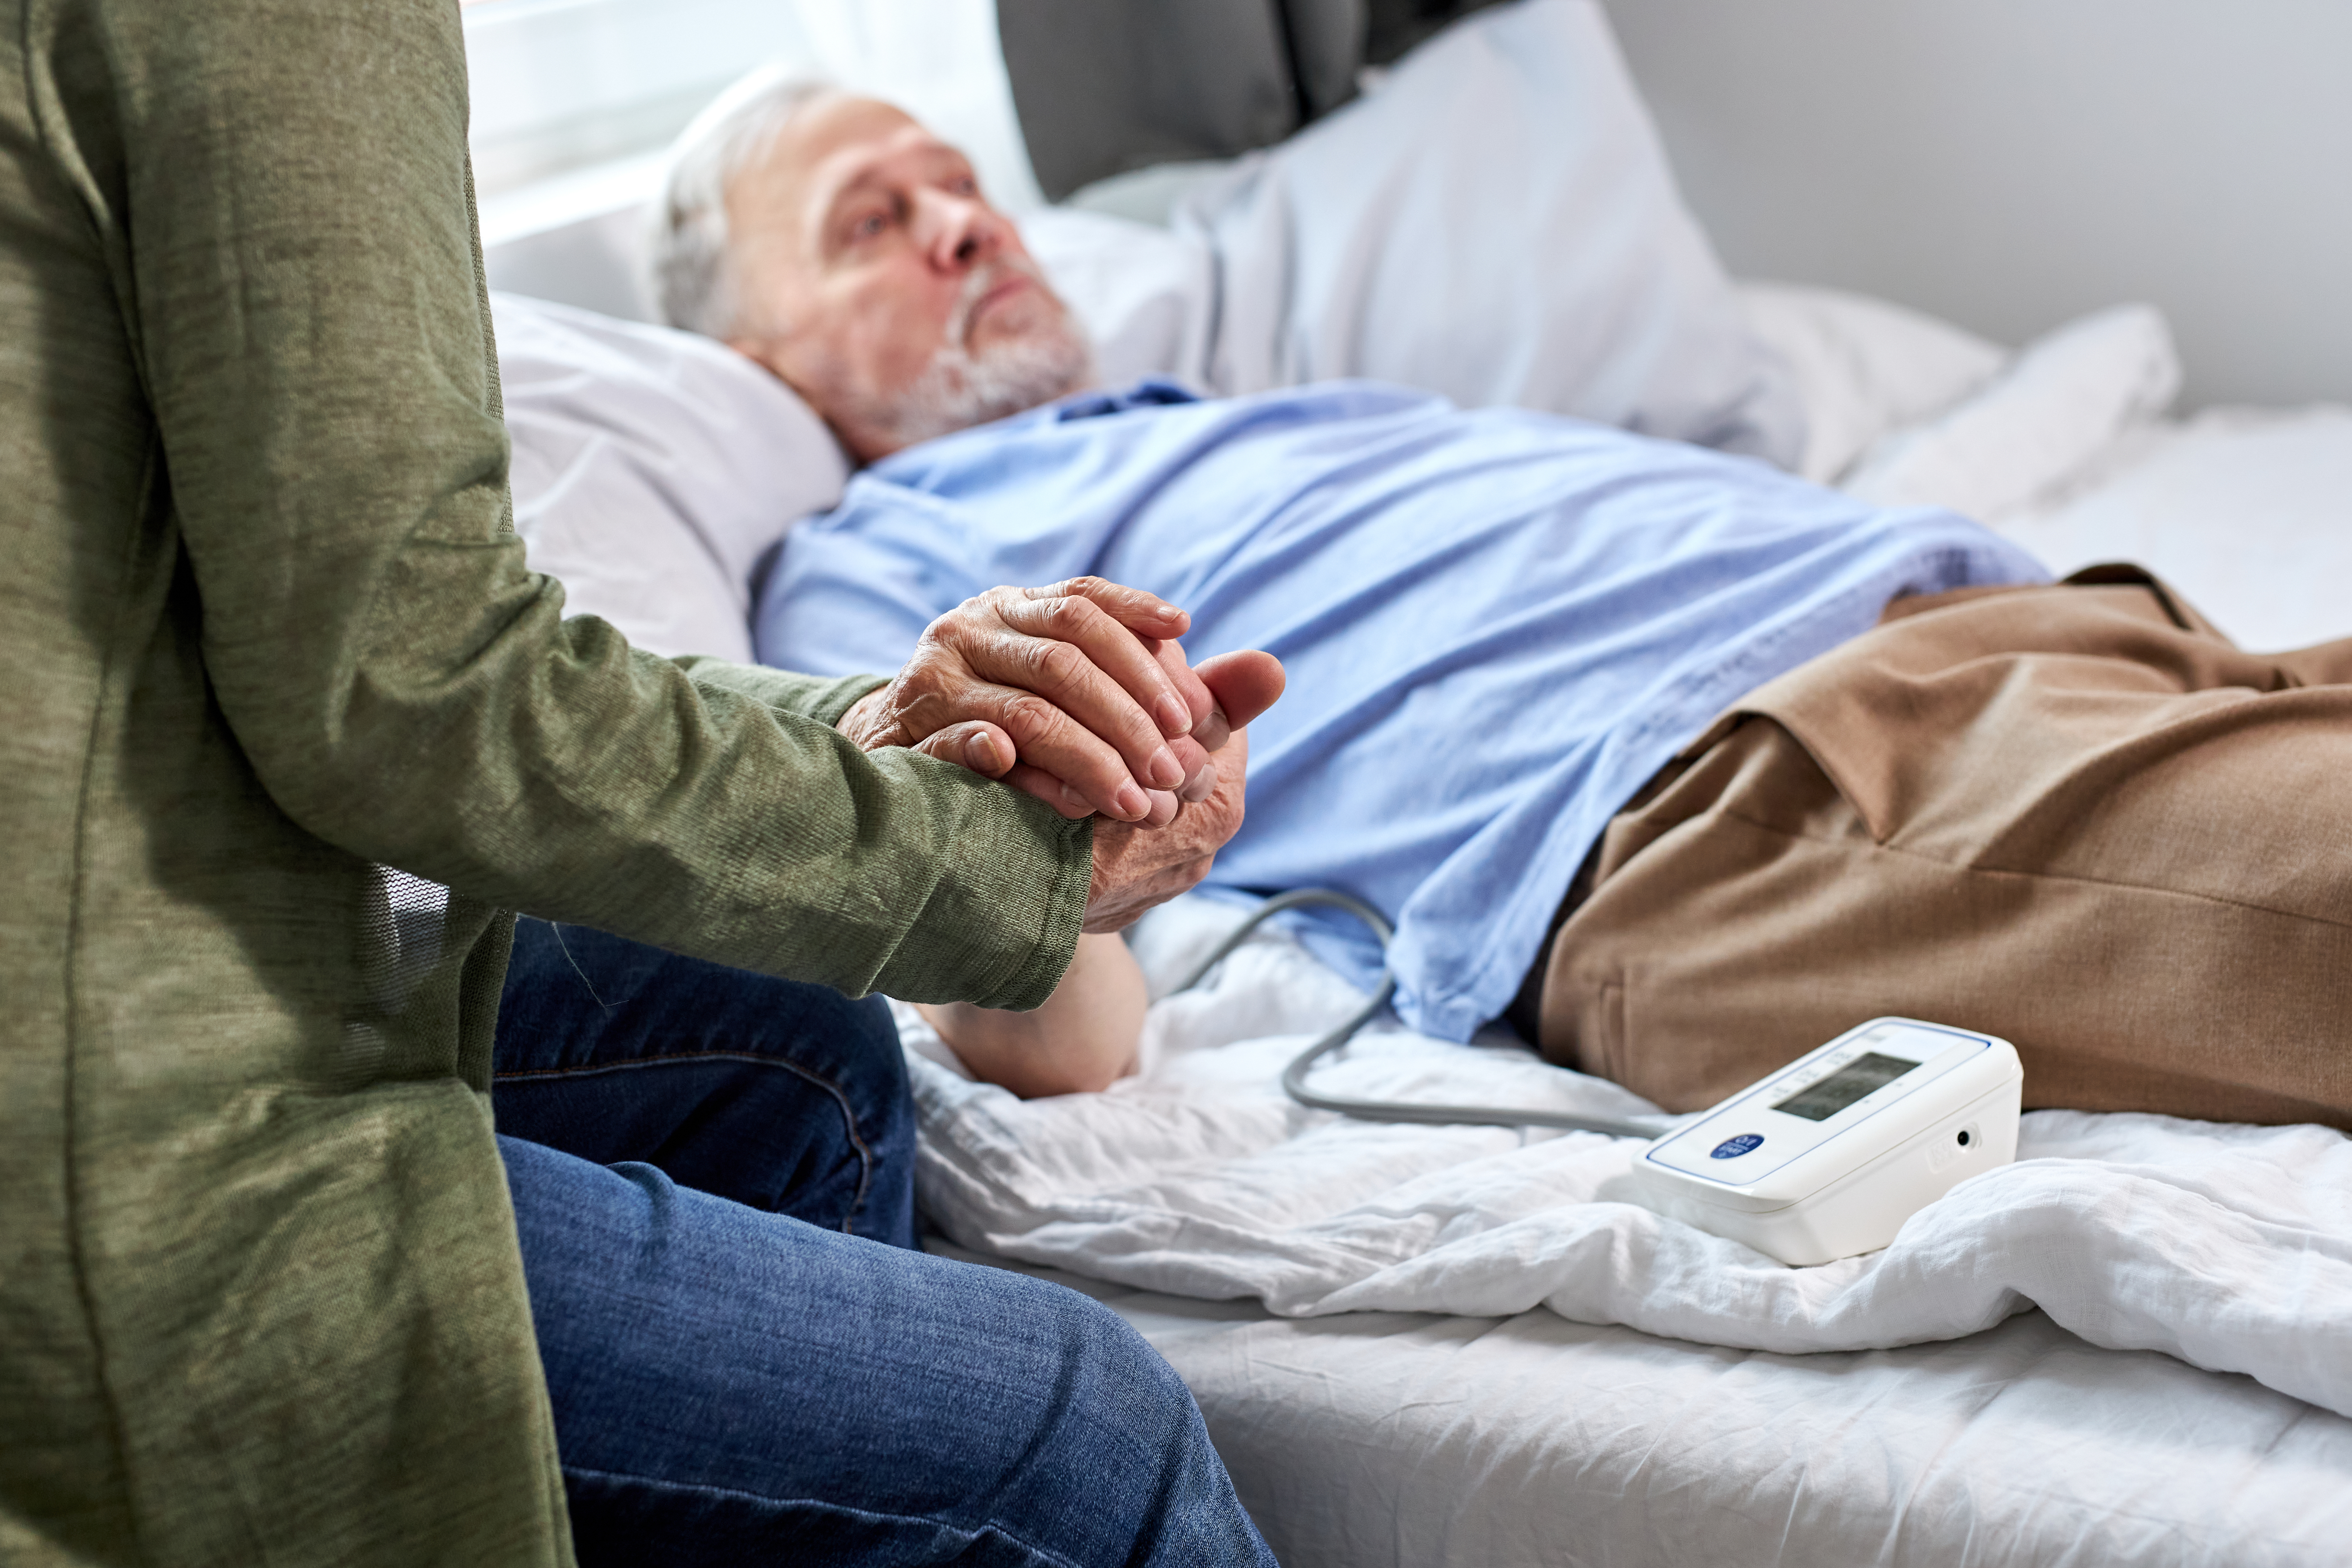 A woman holding an ailing elderly man's hand while sitting beside him | Source: Shutterstock